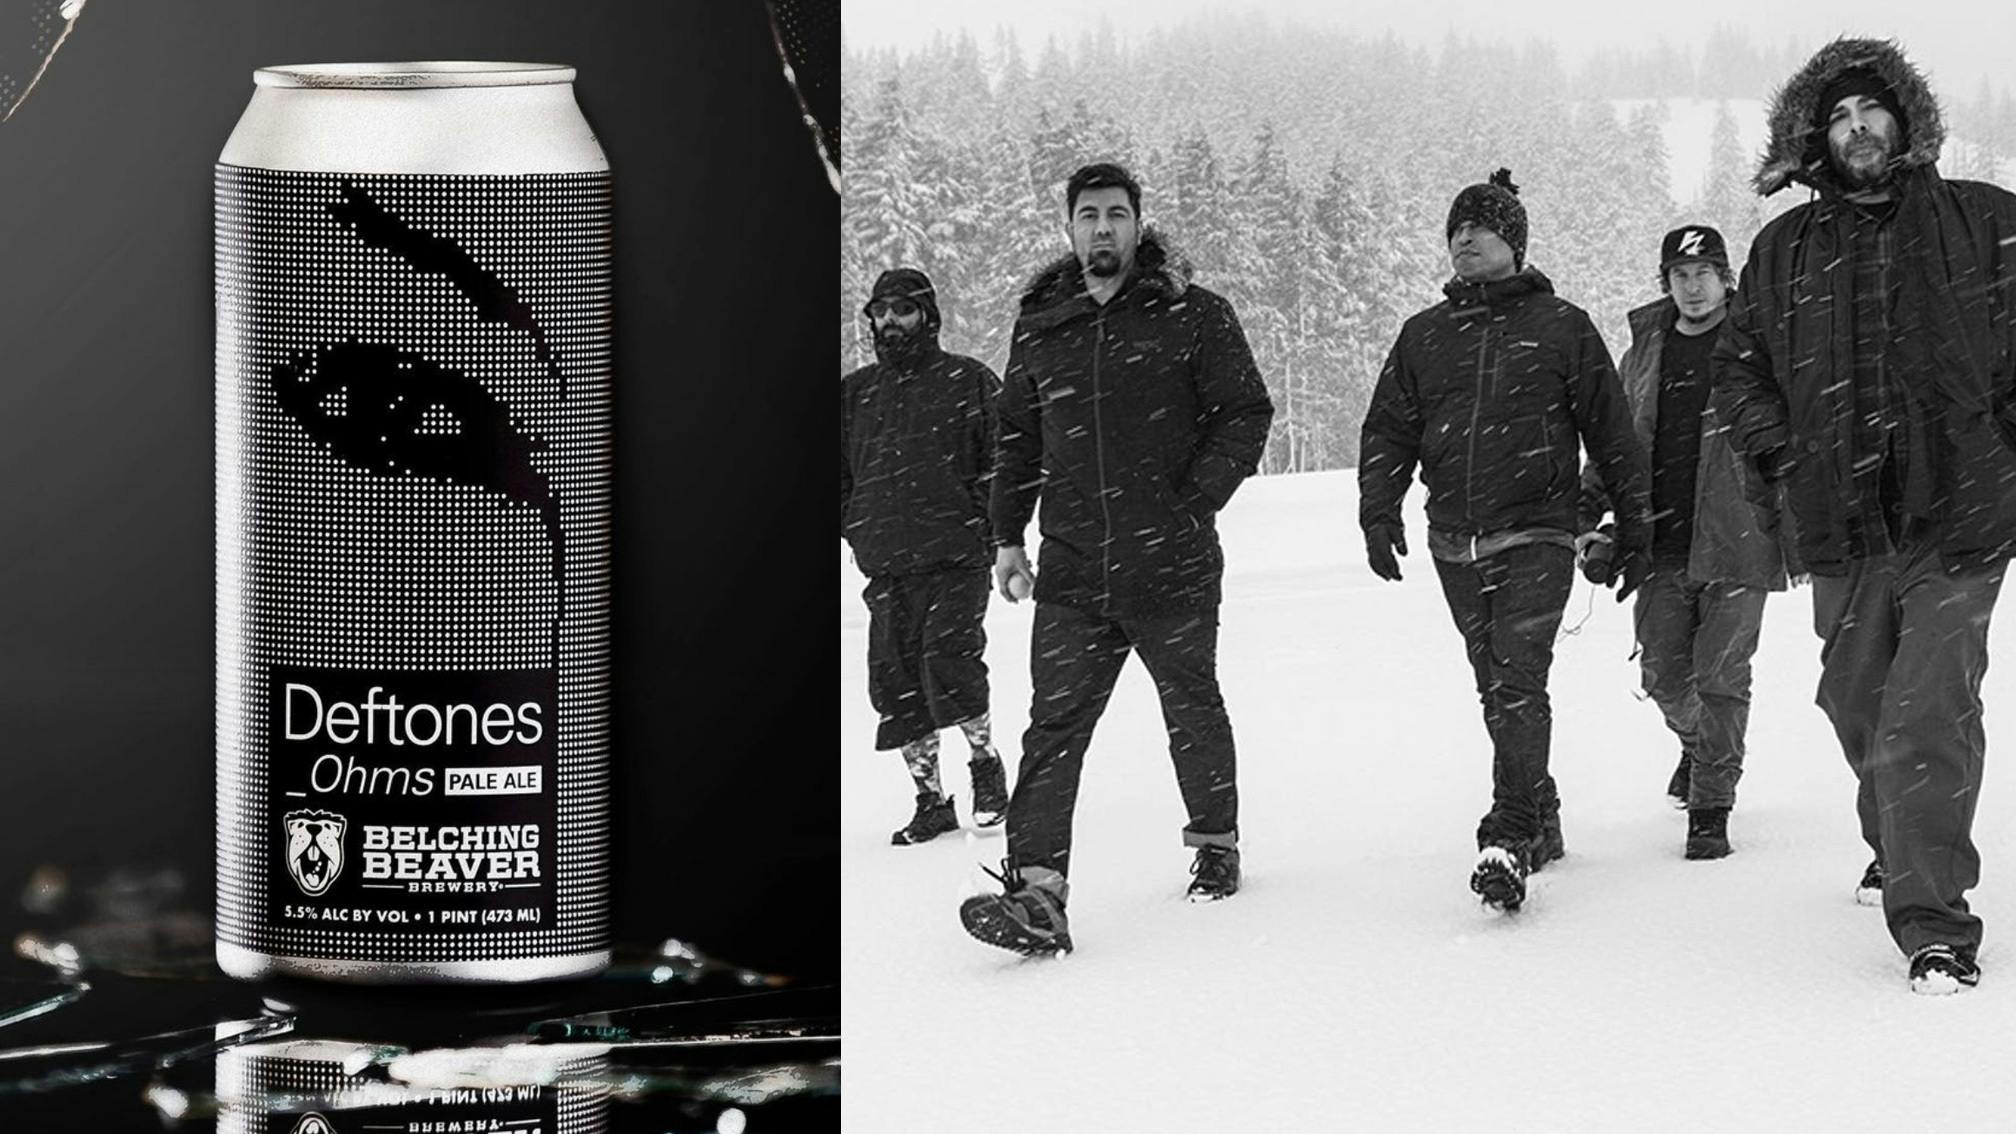 Deftones and Belching Beaver Brewery announce Ohms pale ale